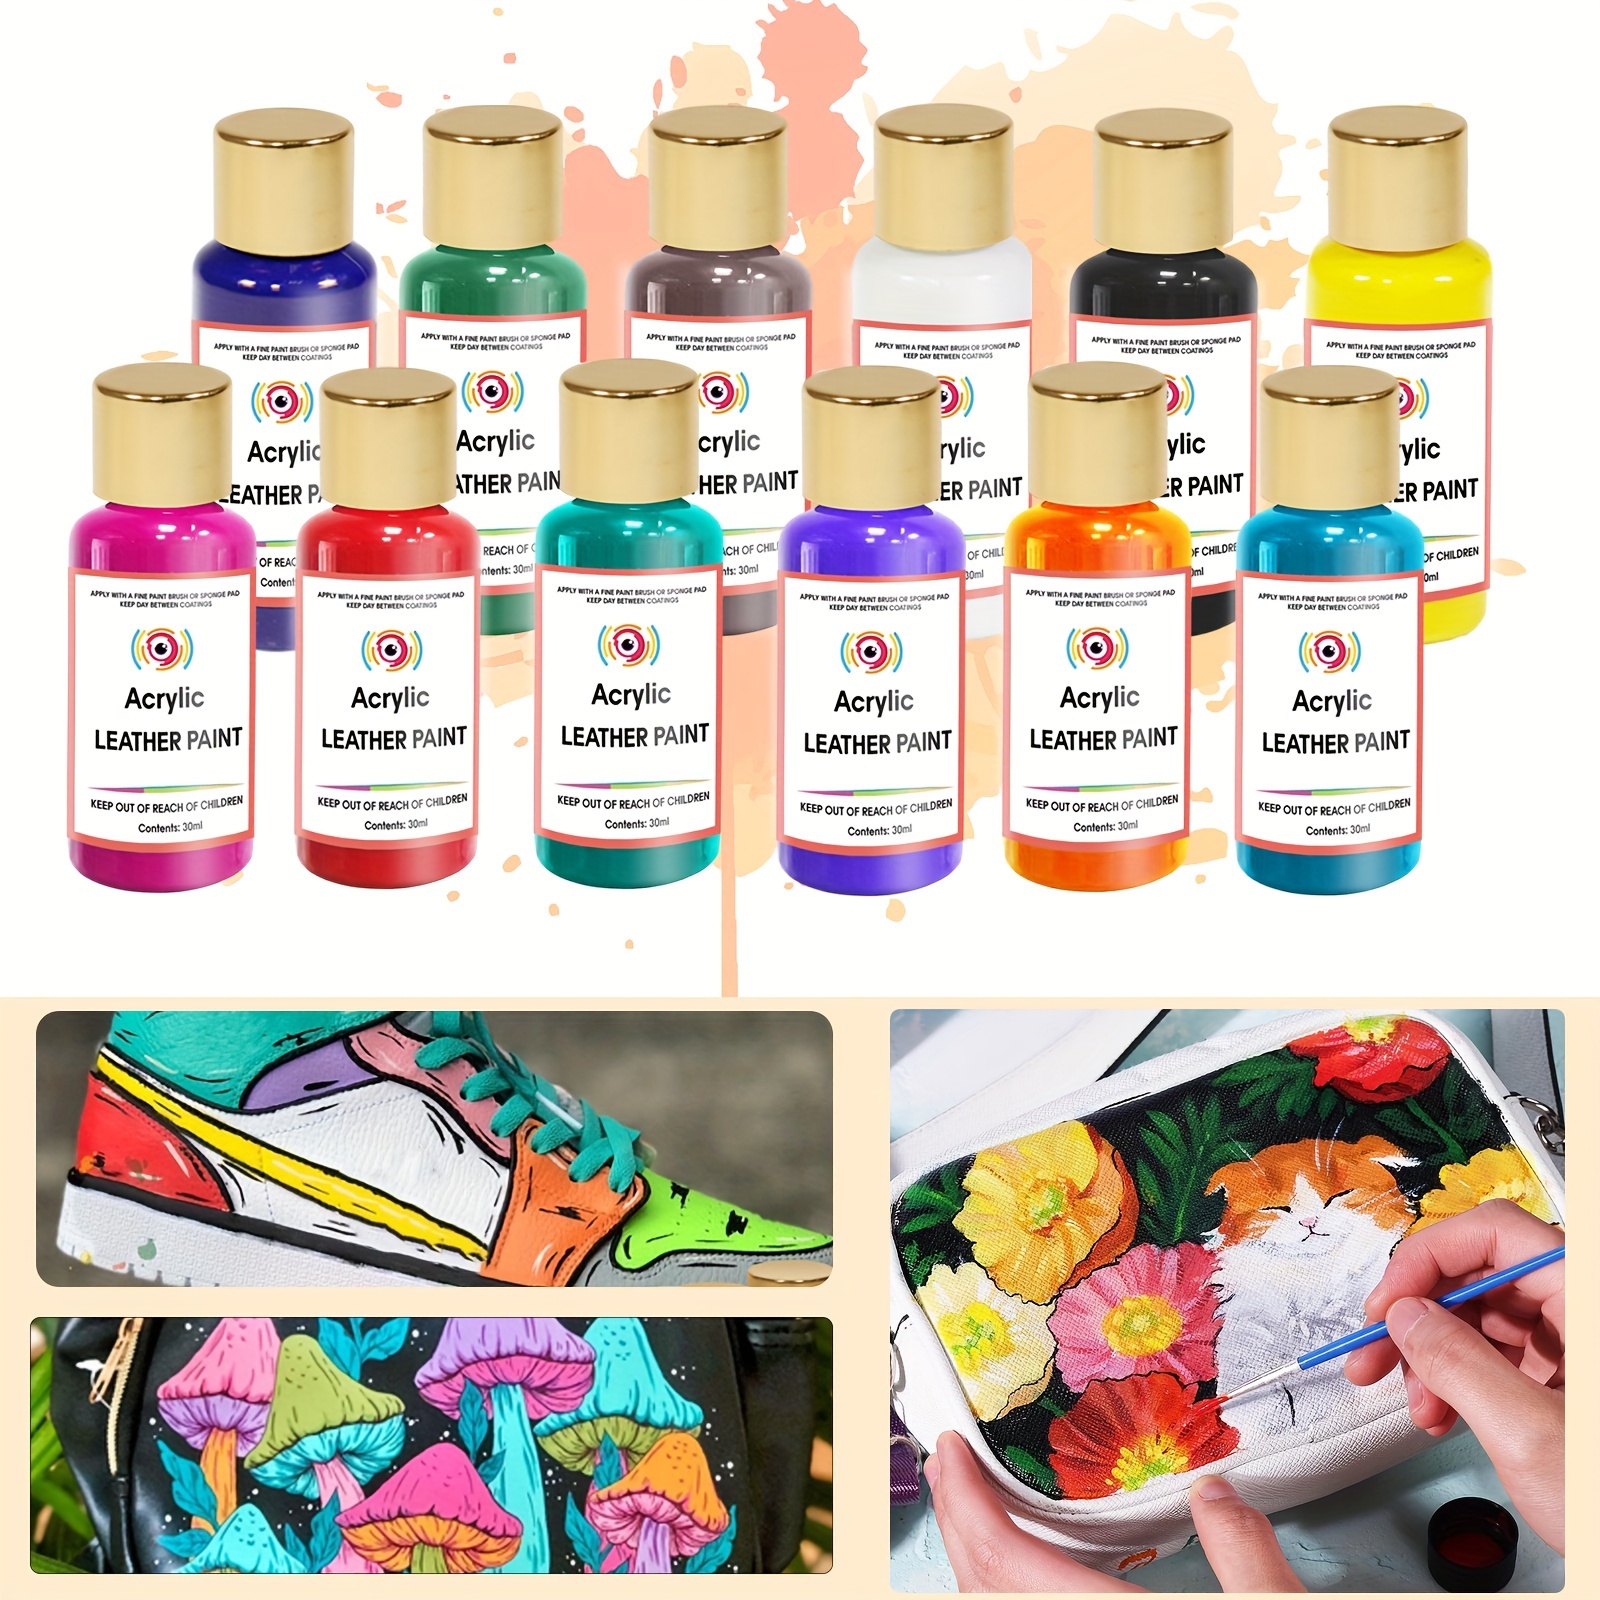 Acrylic Leather Paint For Shoes & Leather Accessories - Premium Shoe Paint  Kit For Sneakers, Bags, Purses & More - Waterproof, Flexible, Long-lasting  Sneaker Paint Kit, High-quality & Affordable